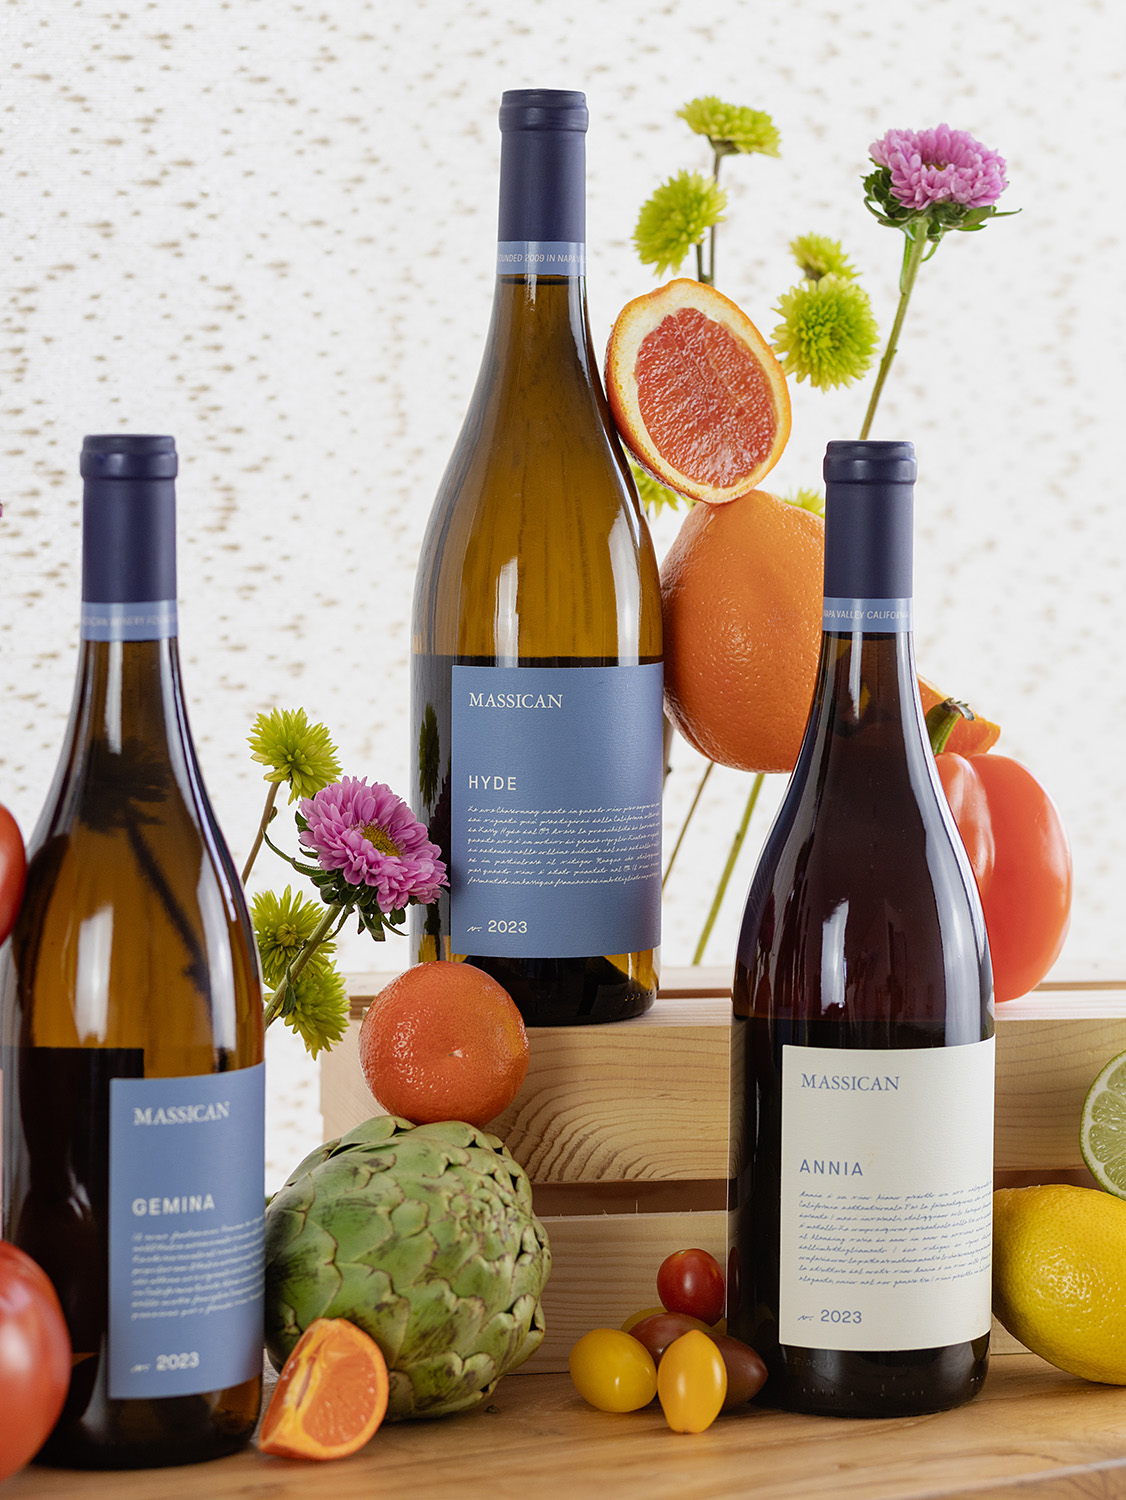 Massican Wines Surrounded by a Farmer's Market Find - Fruits, vegetables, flowers. Massican Annia White Wine and Gemina White Wine and Hyde Vineyard Chardonnay pictured.